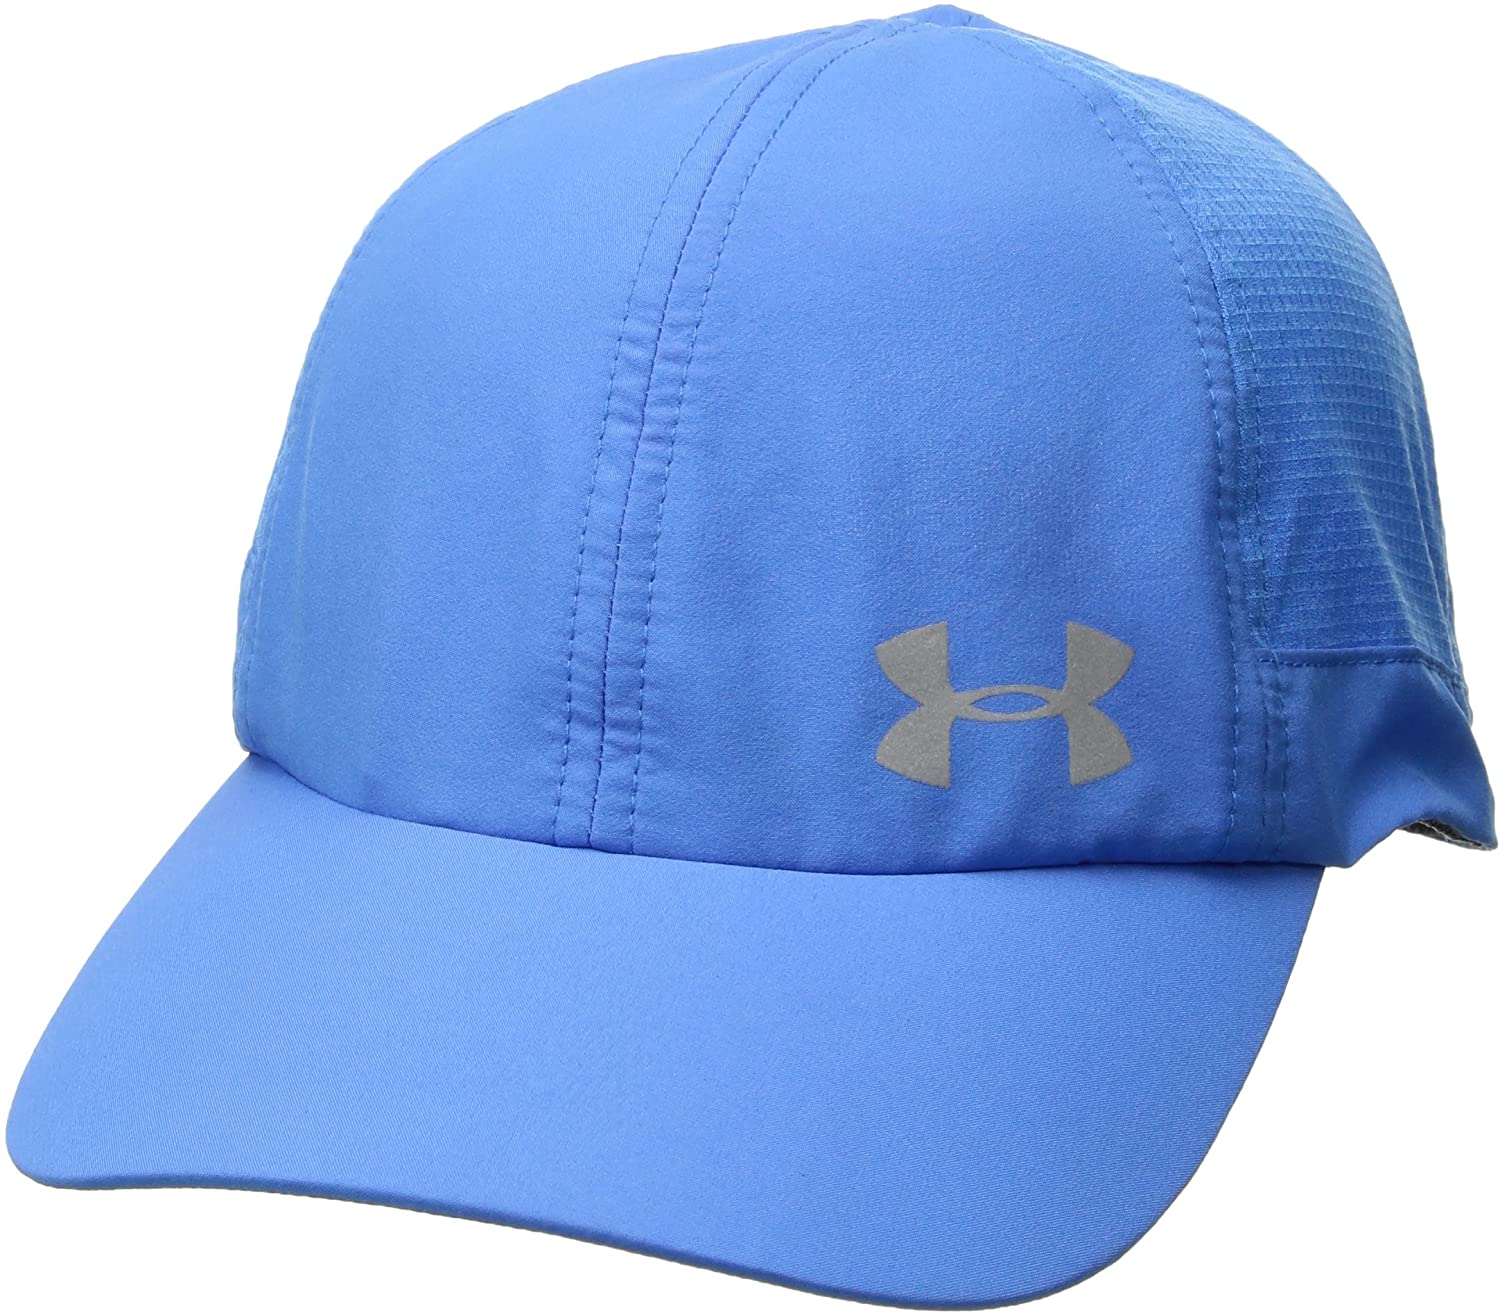 NEW Under Armour Women's Fly By ArmourVent Hat-Blue/Silver 1291073